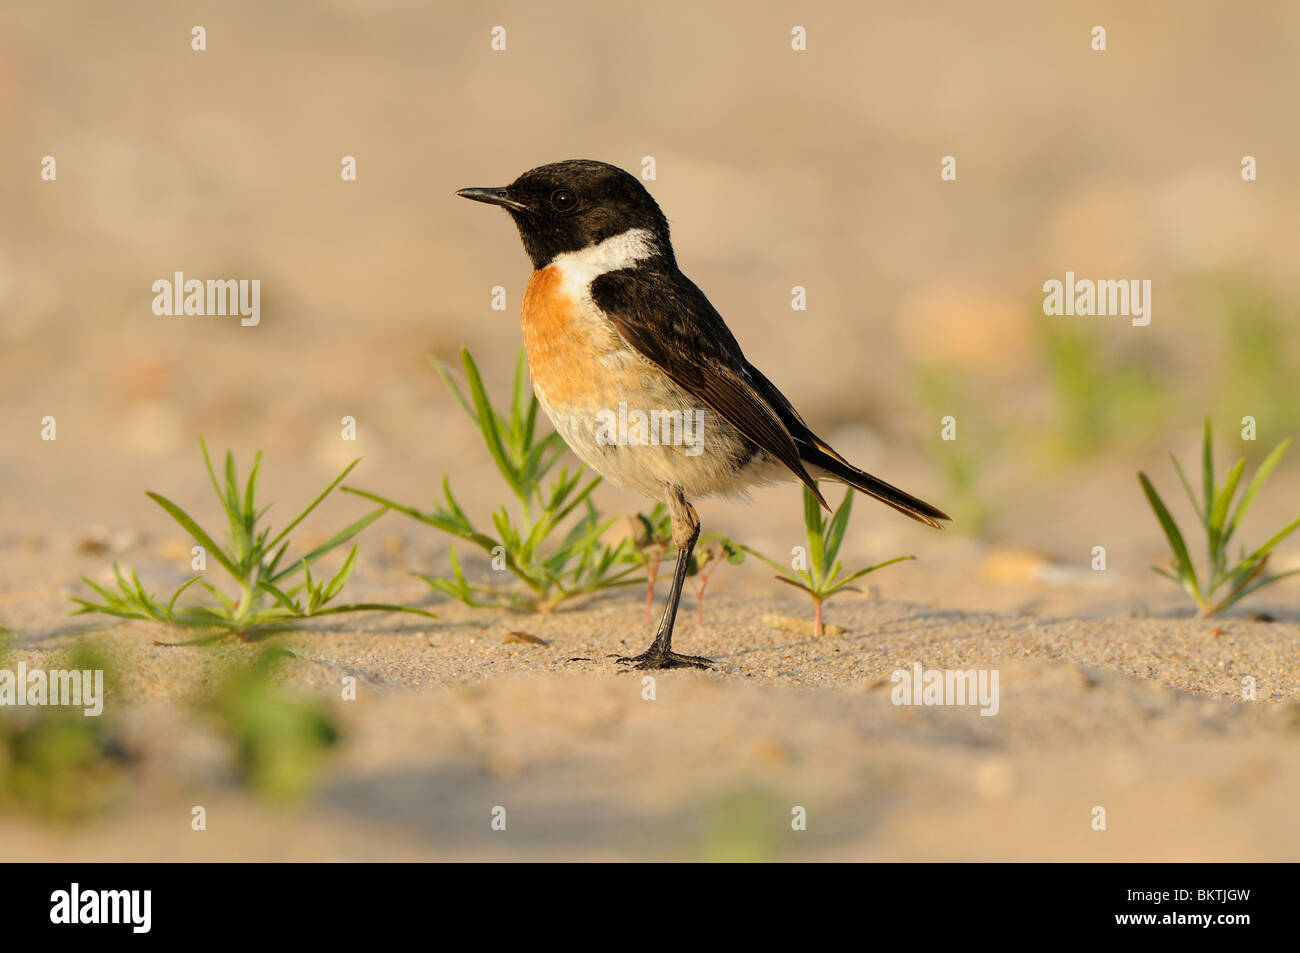 Foraging male Stonechat perched on a beach between young plants of Siberian bugseed in evening light Stock Photo